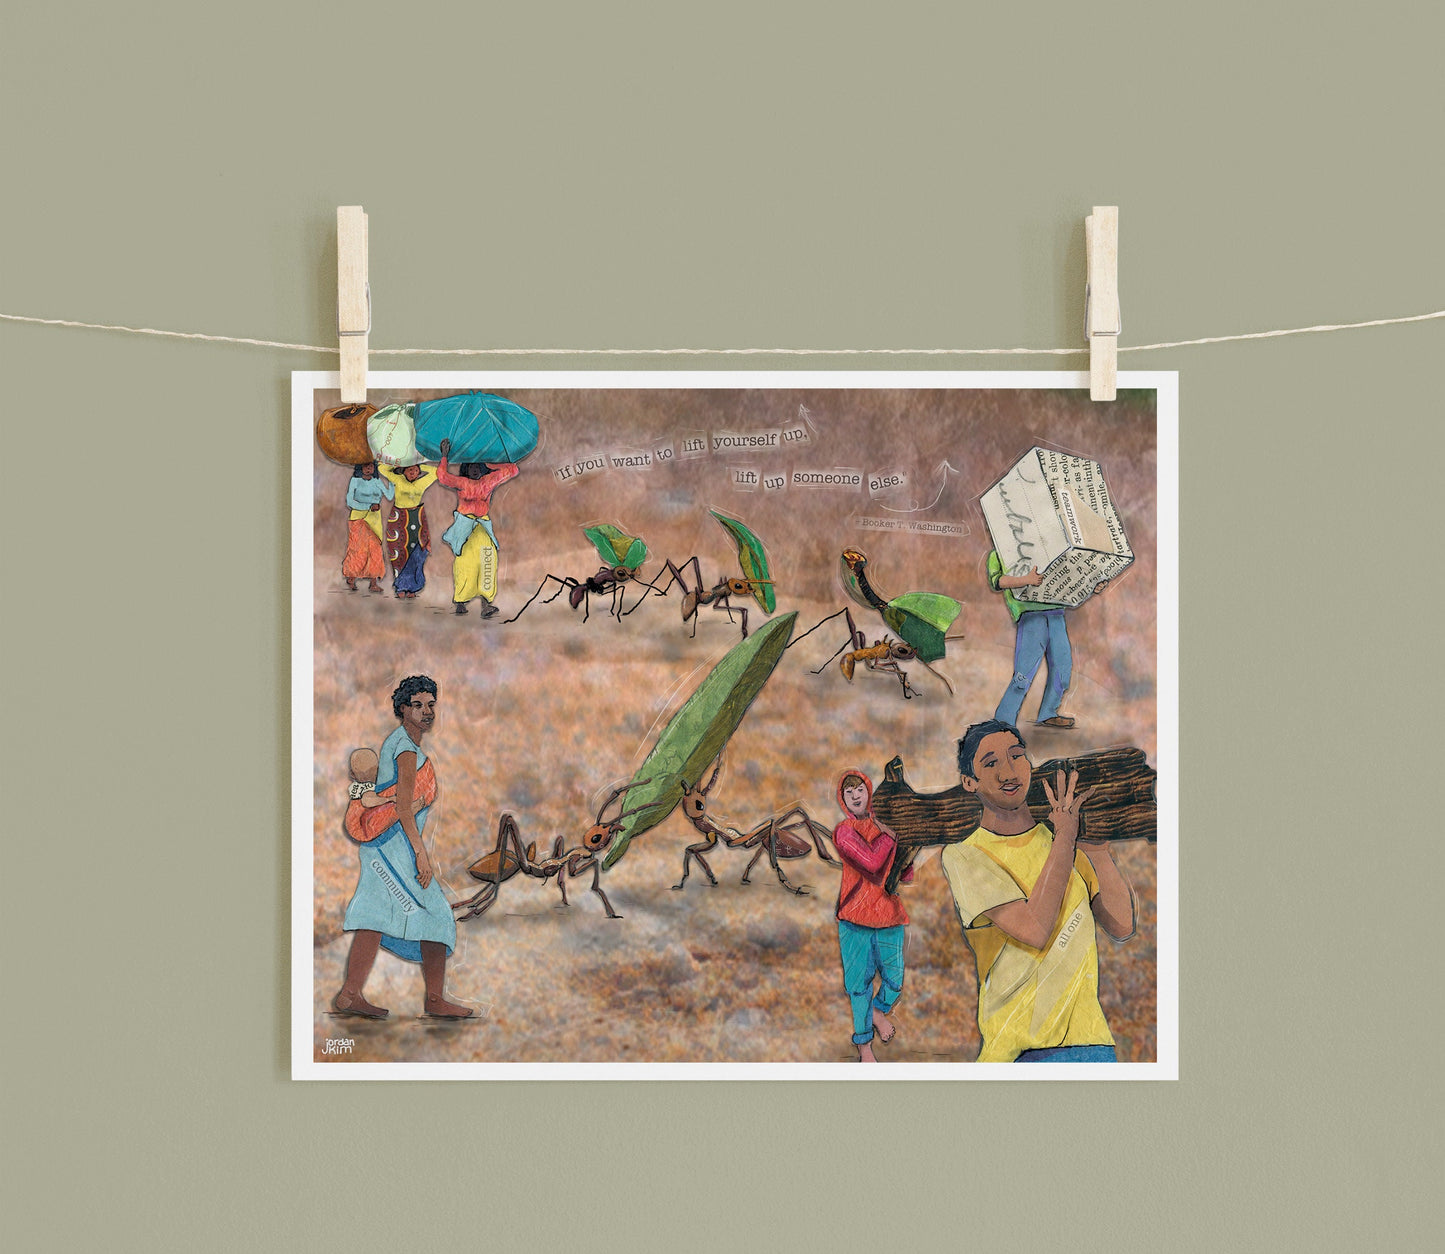 8x10 Art Print of a mixed media collage of people and ants carrying things together, connected, support, Booker t. Washington quote